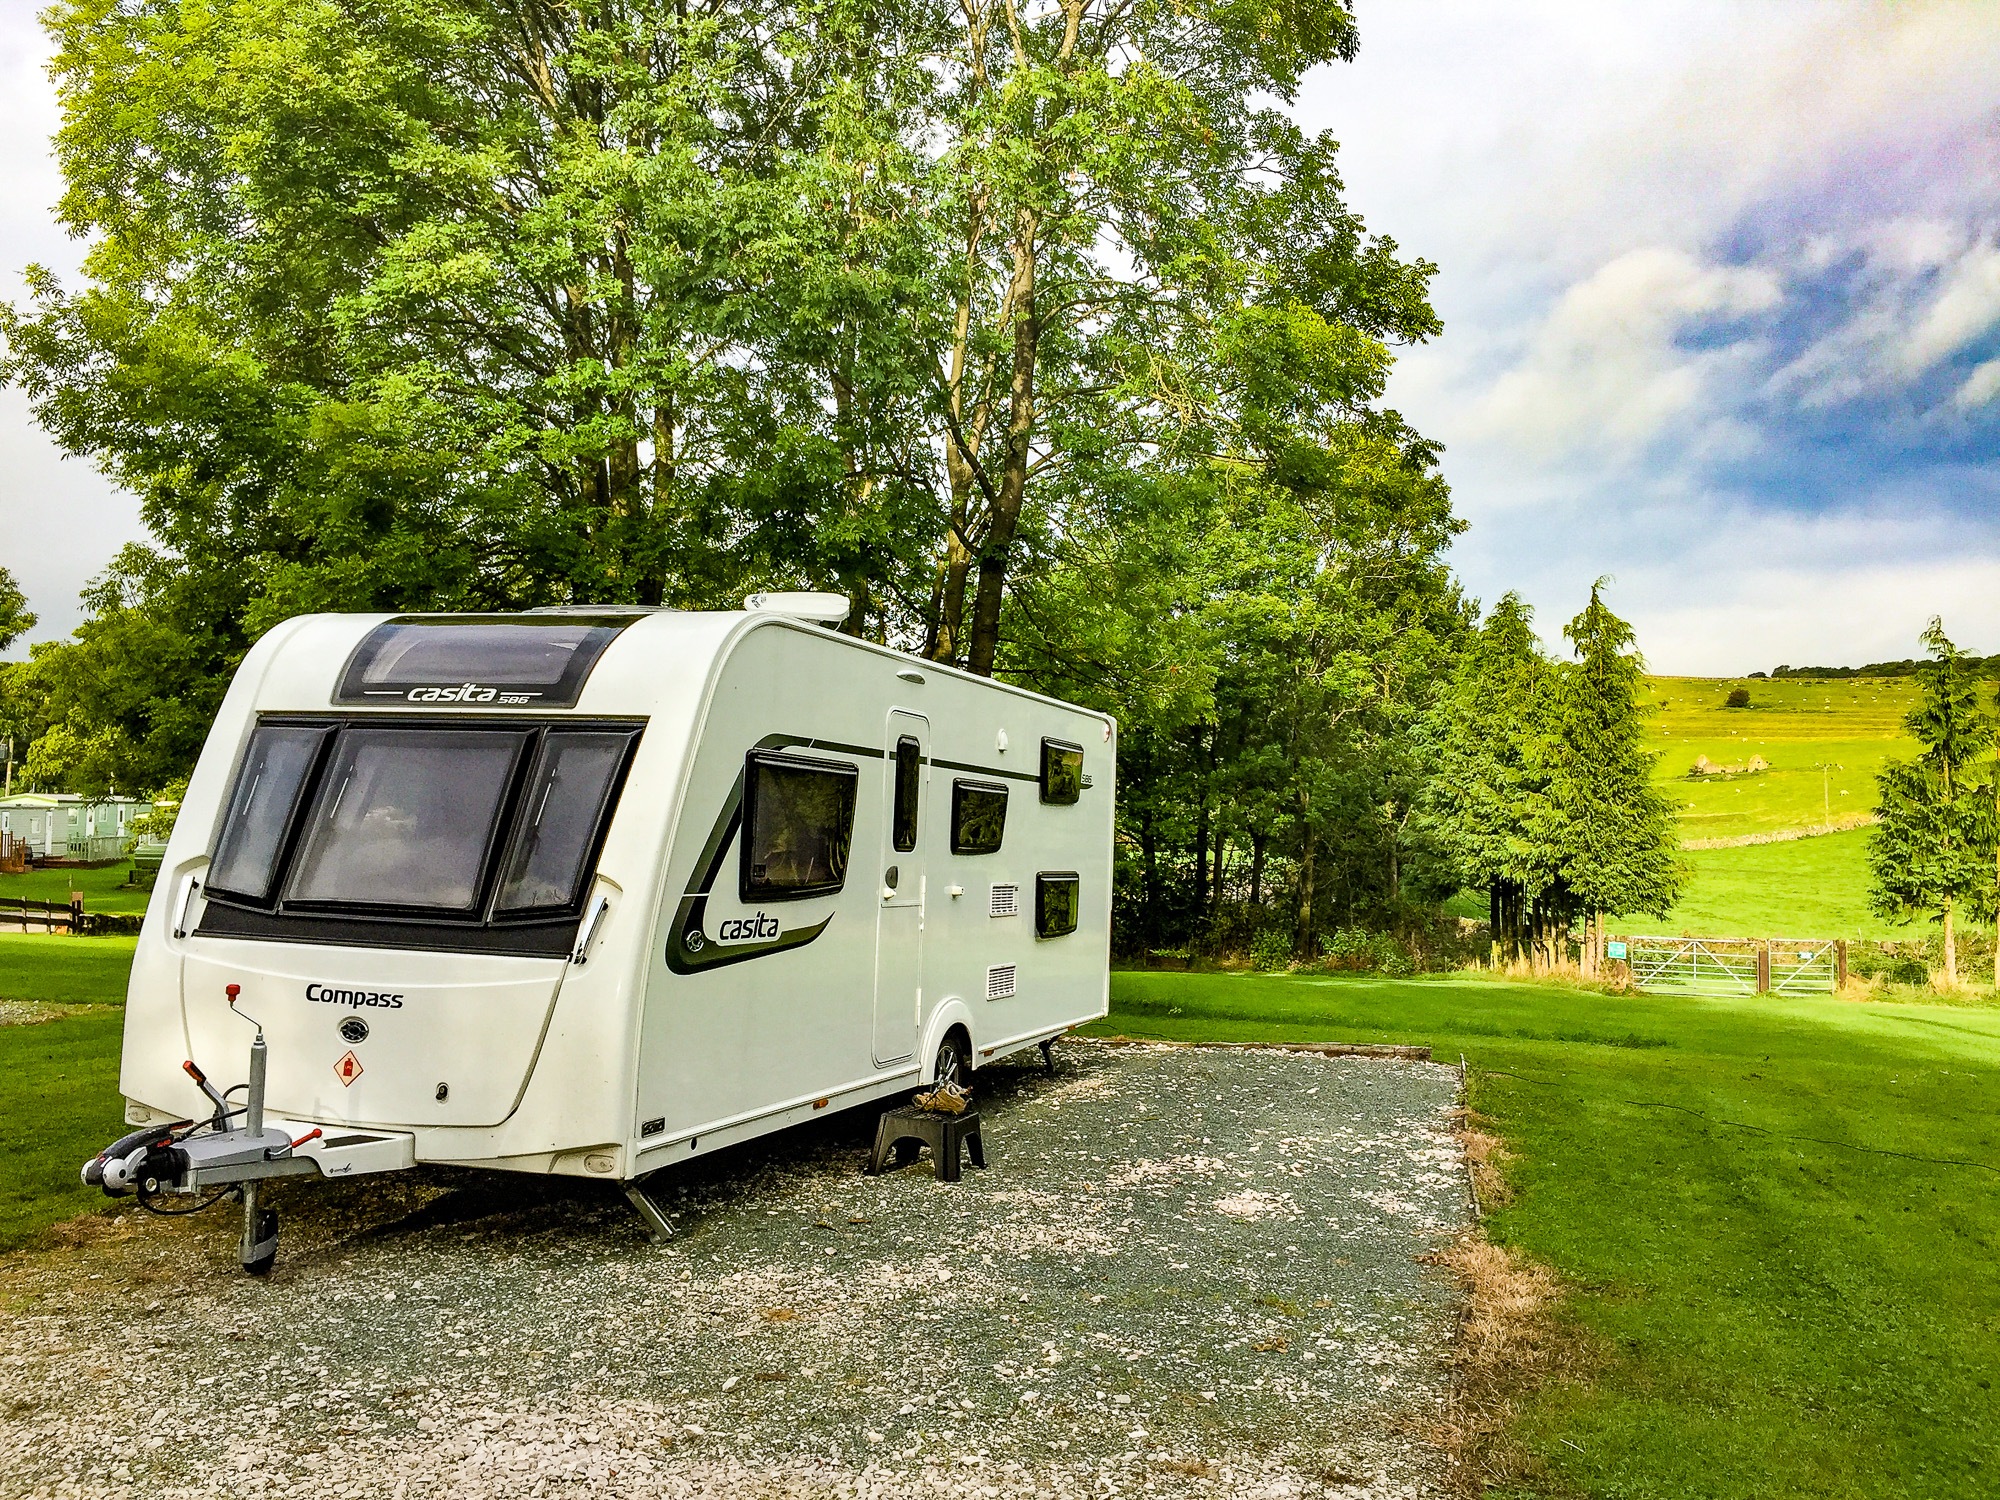 Pitched at Bakewell